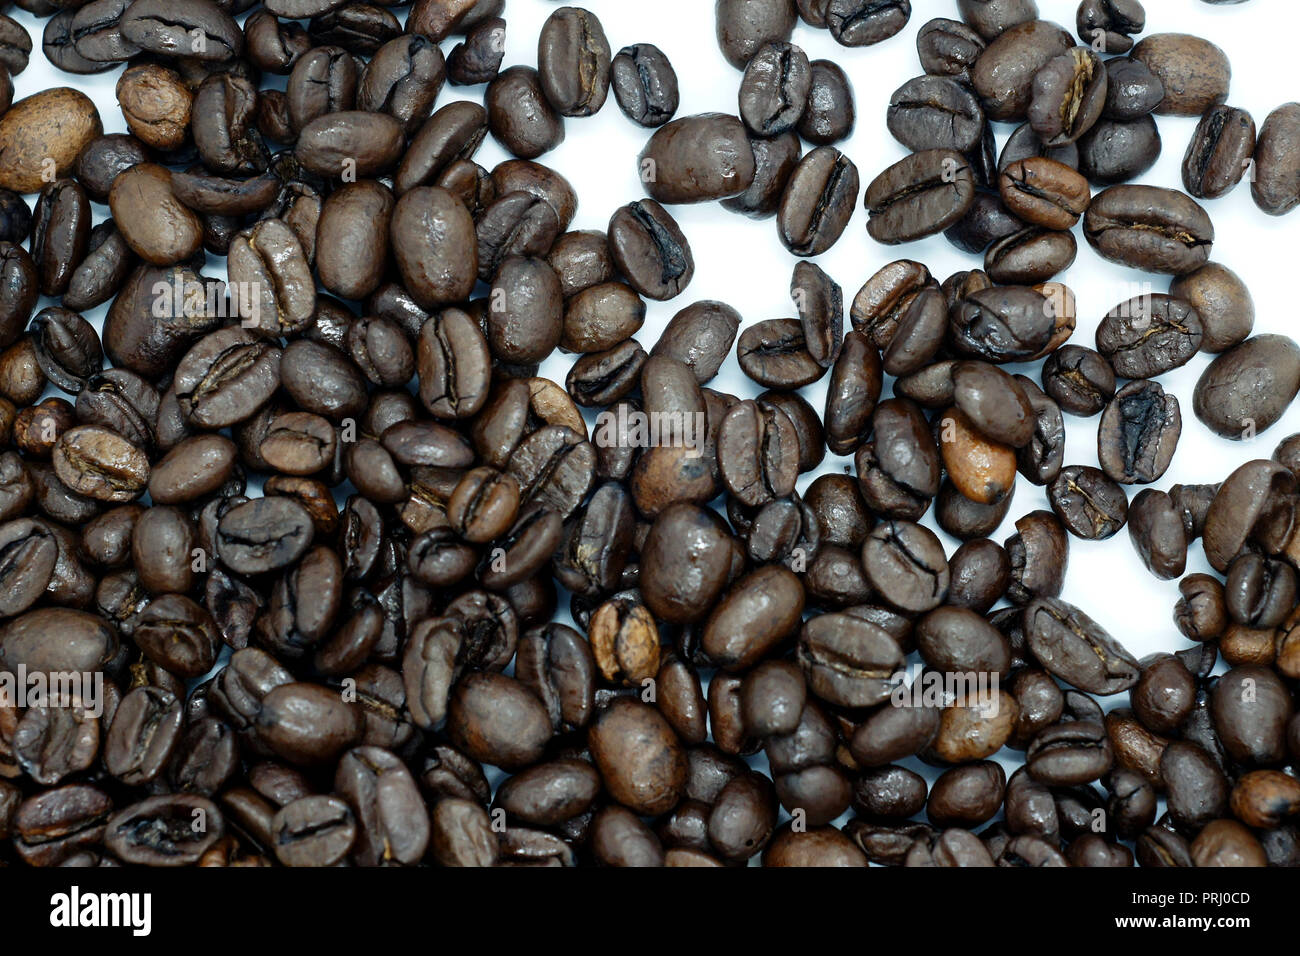 brown roasted coffee beans Stock Photo